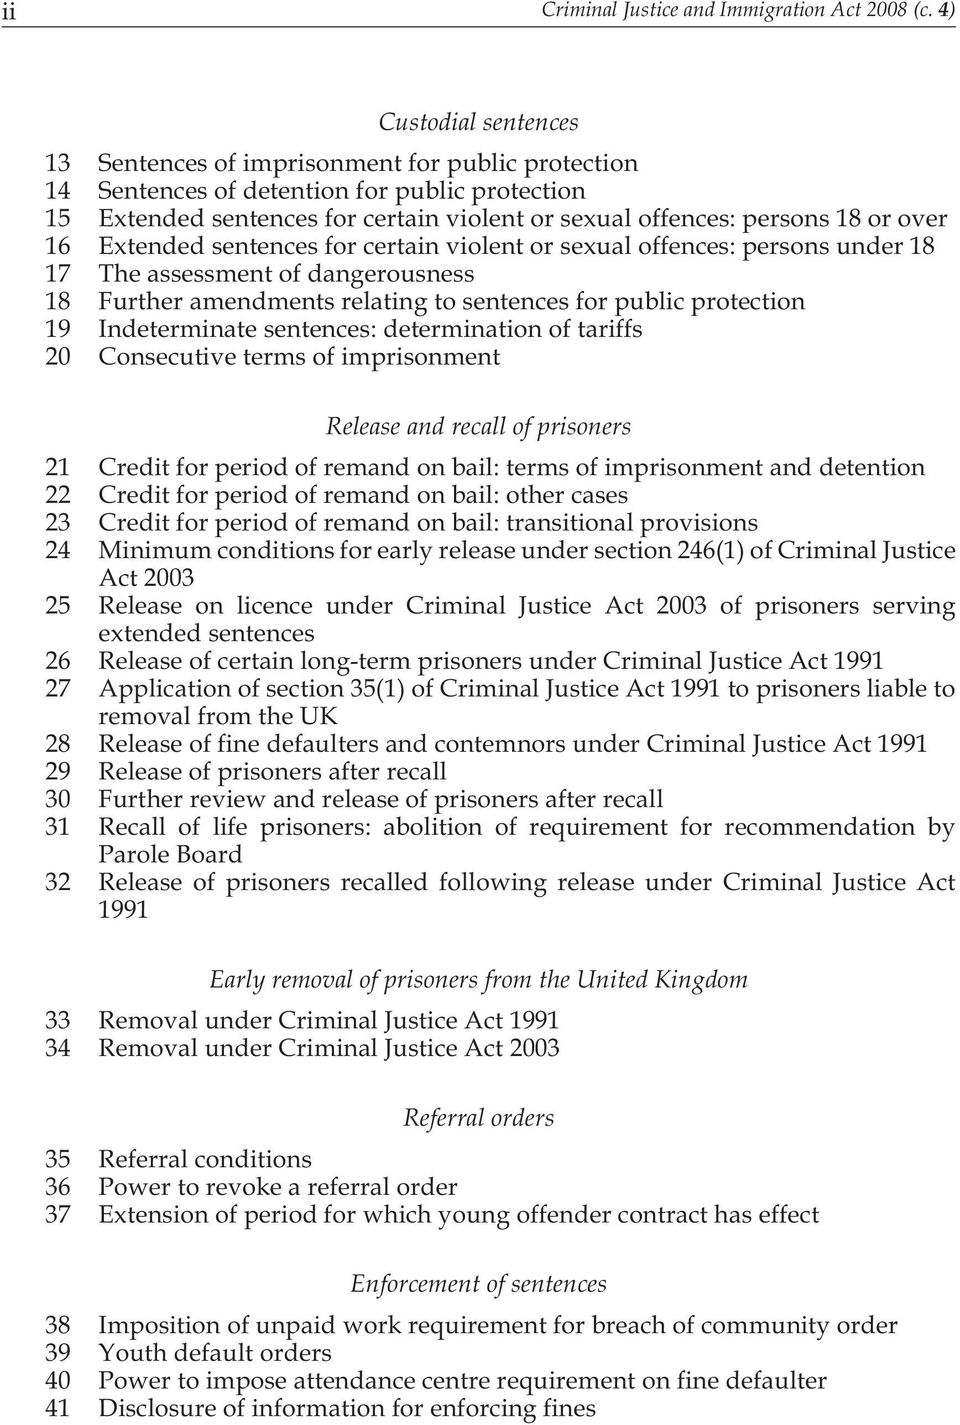 over 16 Extended sentences for certain violent or sexual offences: persons under 18 17 The assessment of dangerousness 18 Further amendments relating to sentences for public protection 19